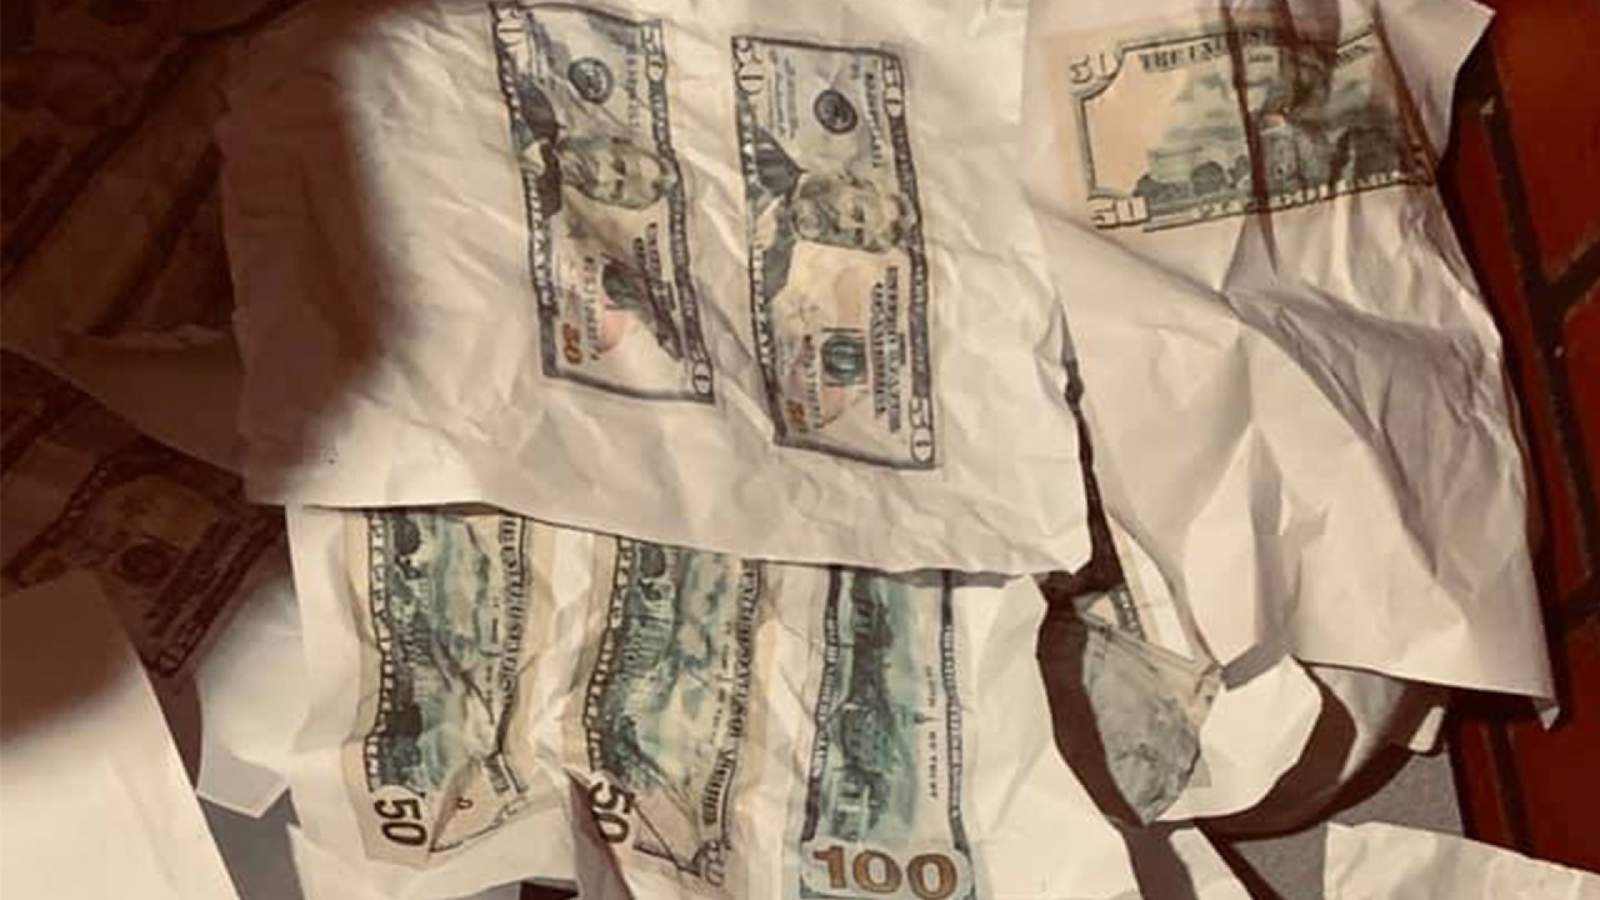 Woman arrested in Atascosa County after authorities find $7,800 in counterfeit cash